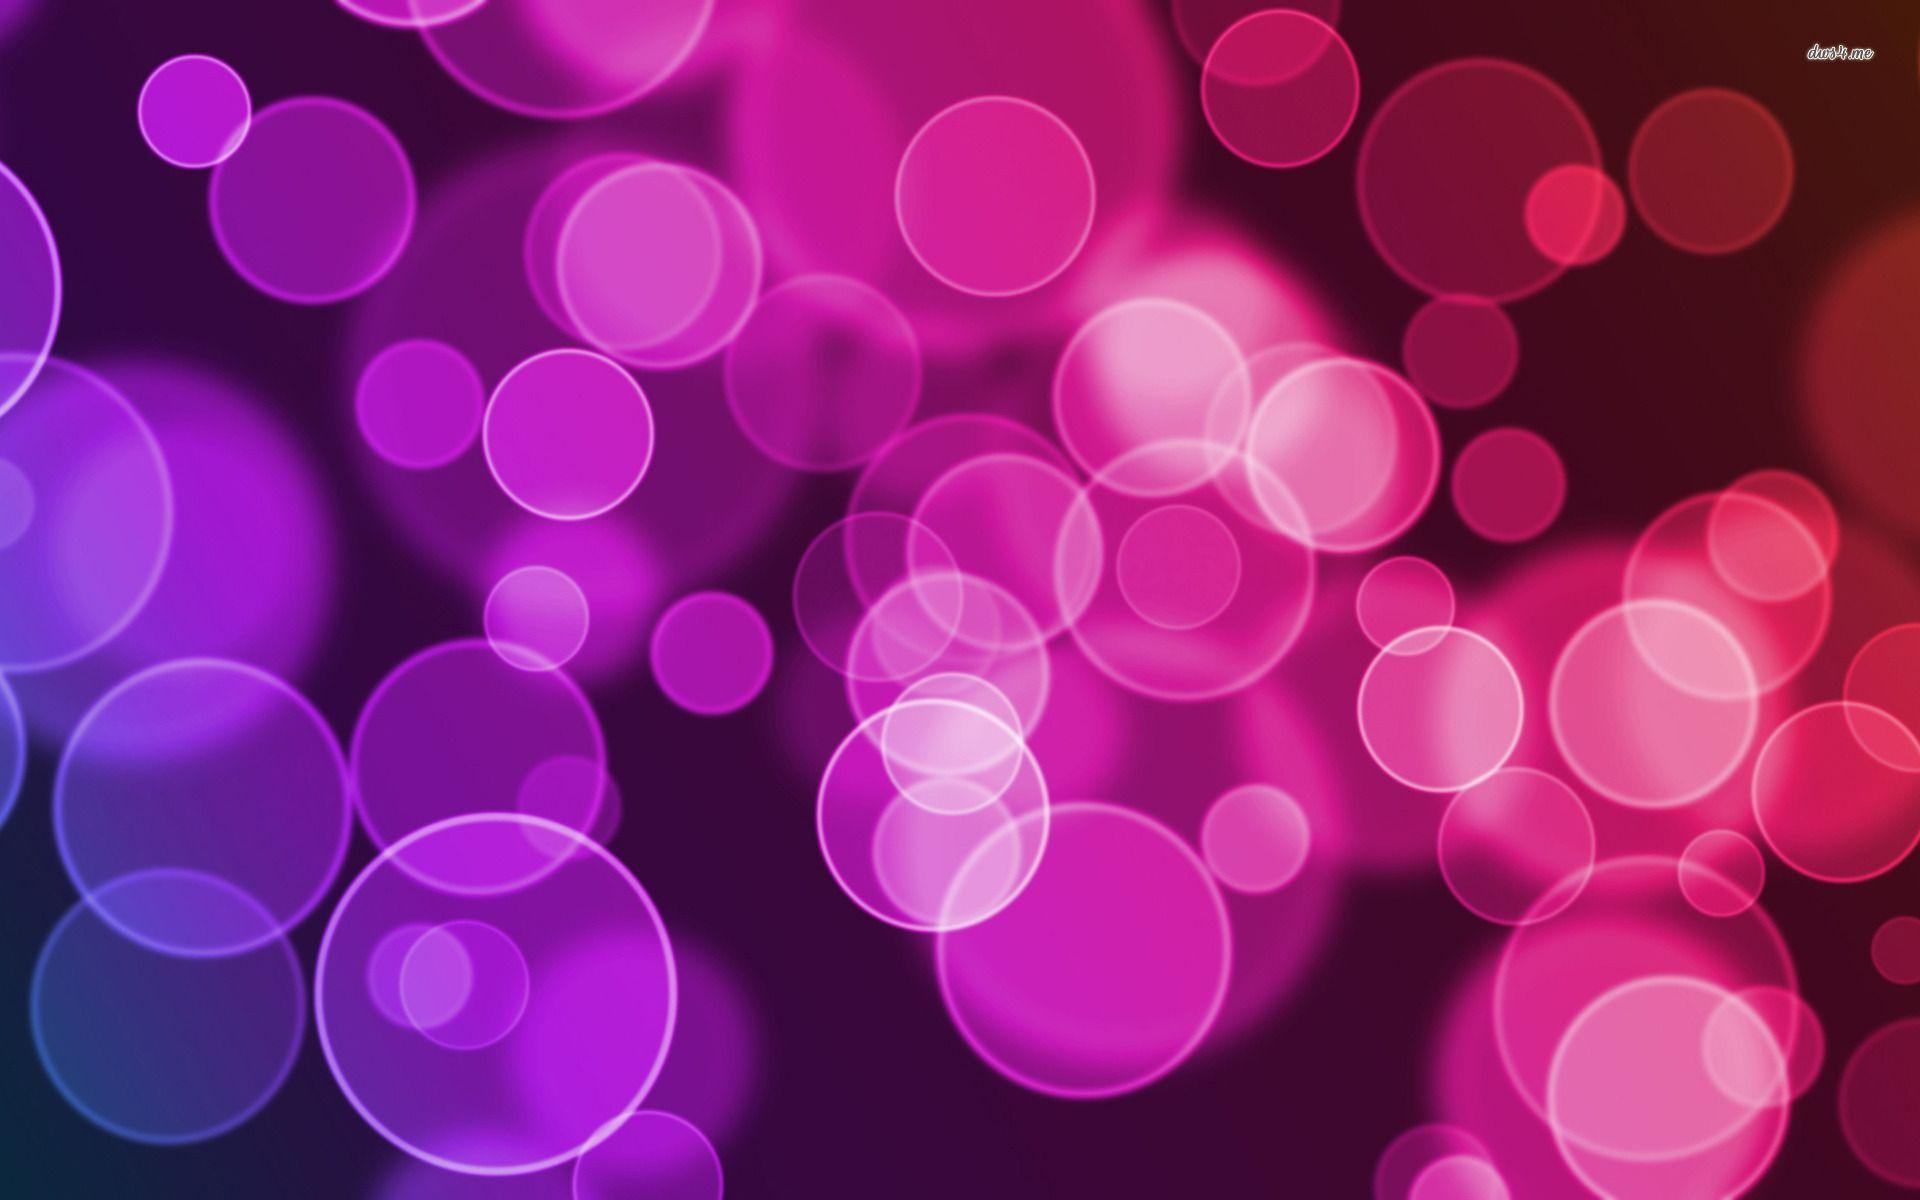 Gallery For Gt Pink Bubbles Background